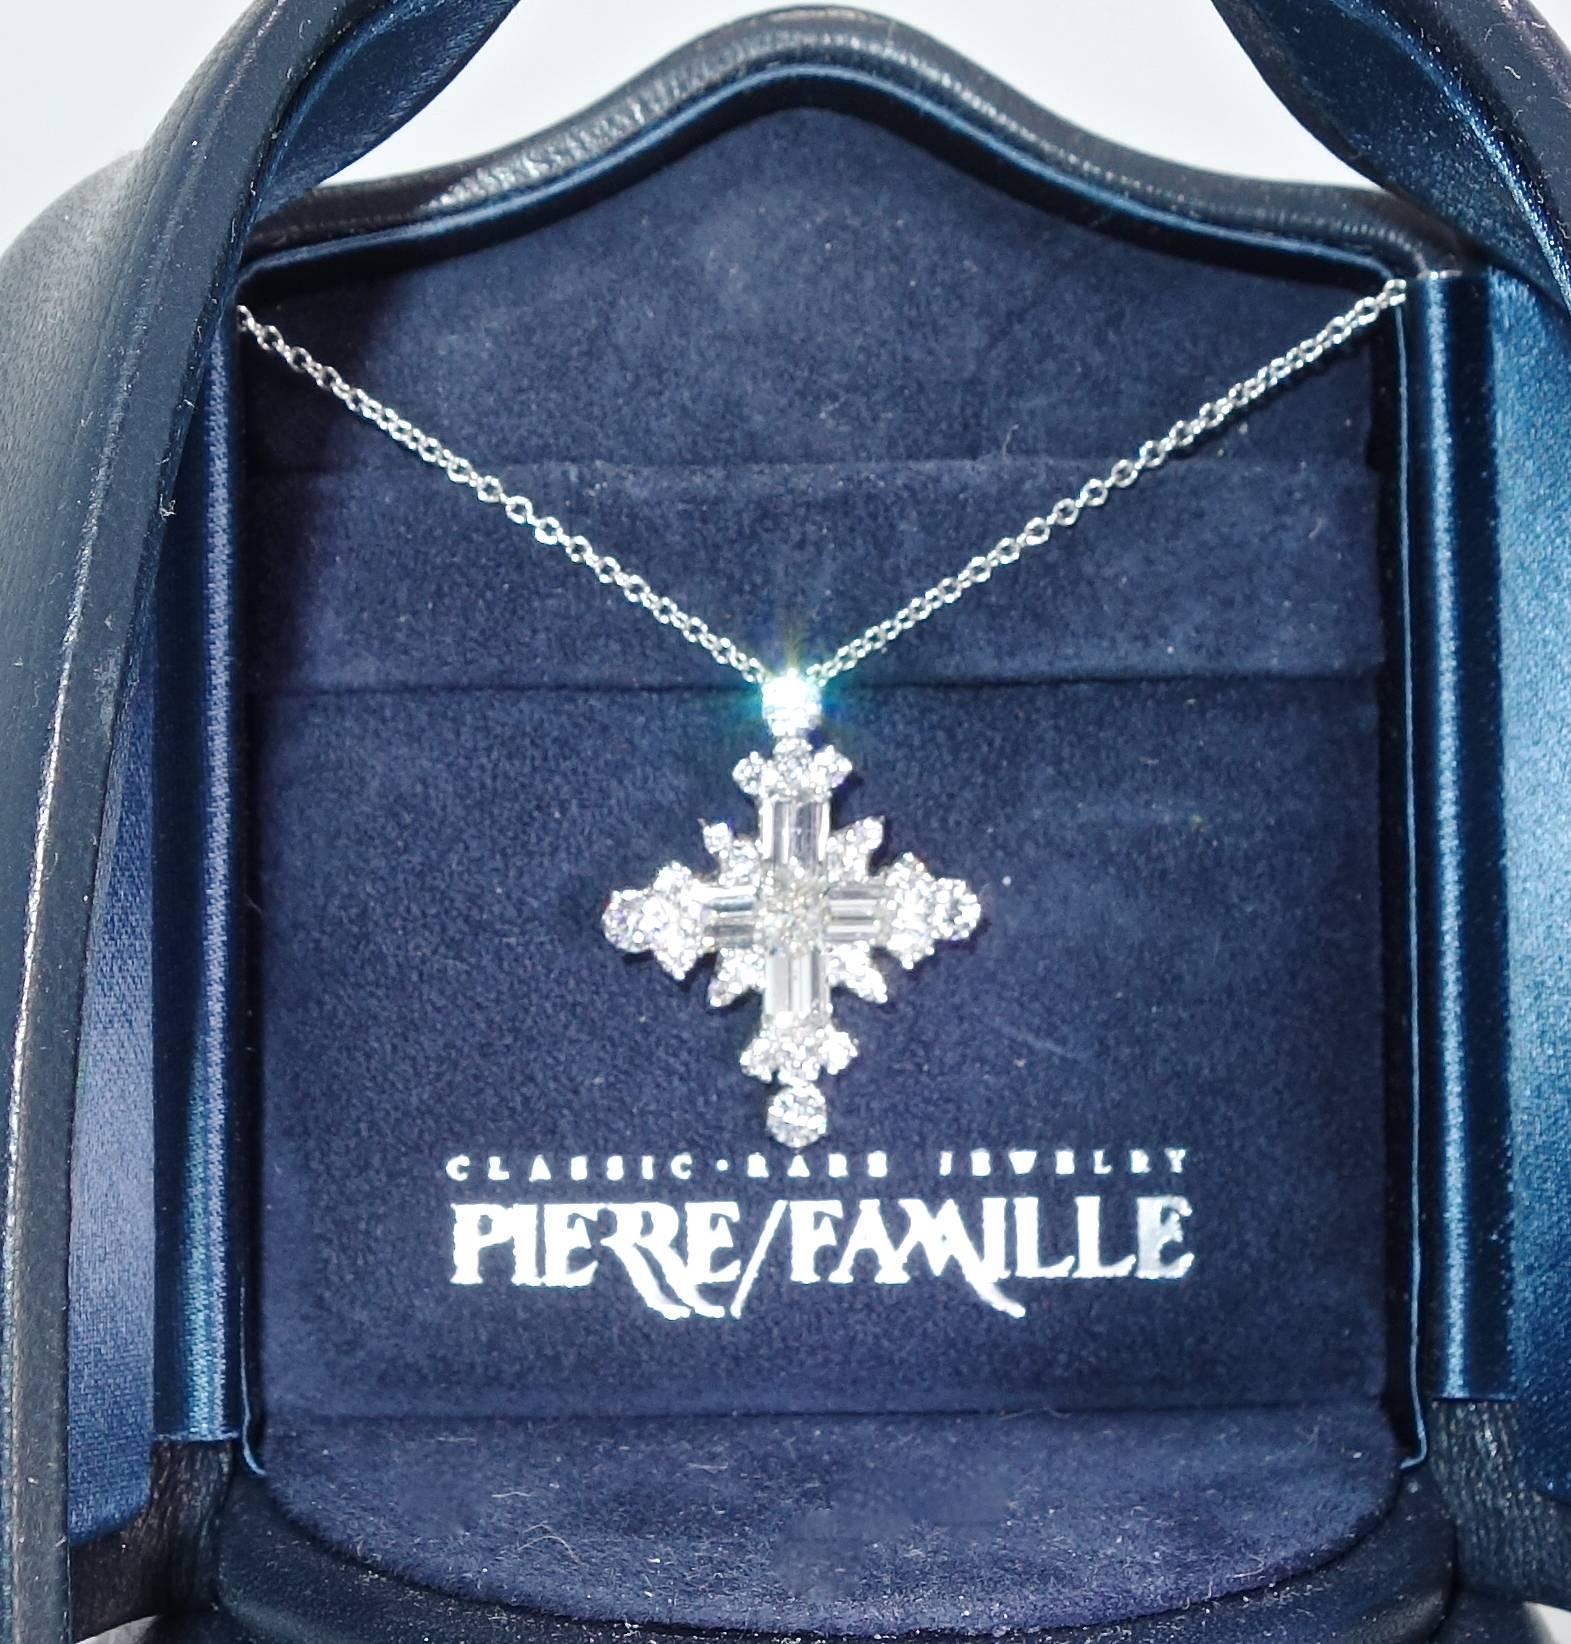 Hand made by Pierre/Famille, in platinum with fancy cut fine diamonds, approximately 3 cts., this necklace is well made, unusual with fine F/G color diamonds (colorless to near colorless) and VVS (very very slightly included) clarity.  Suspended